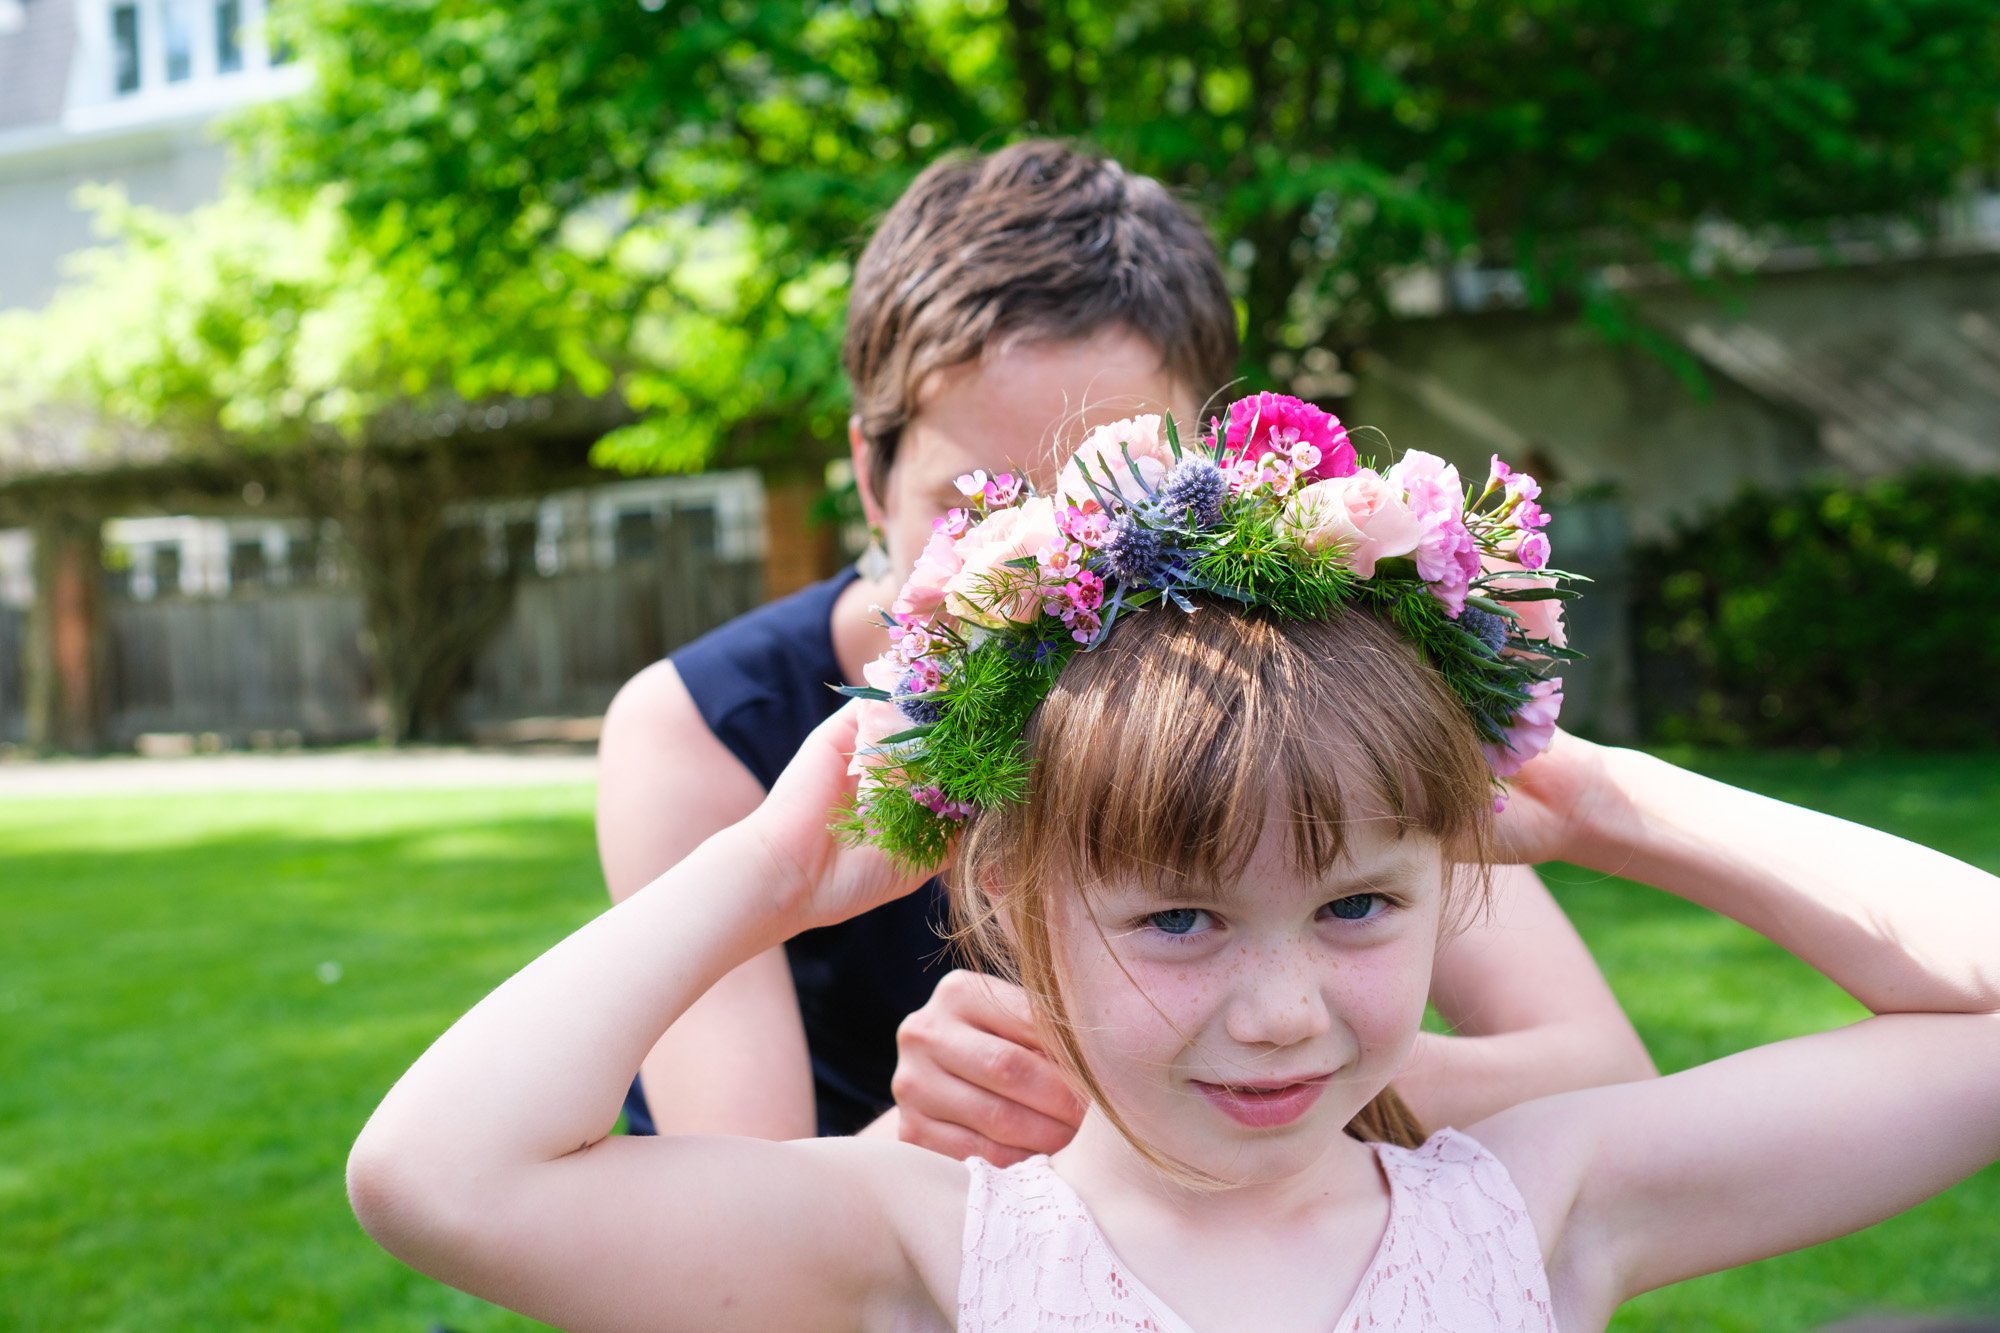  A colour candid wedding photograph of one of Greg and Damon’s flower girls as she has her floral crown adjusted on the grounds of Langdon Hall before the wedding ceremony.  Photograph by Toronto wedding photographer Scott Williams (www.scottwilliams